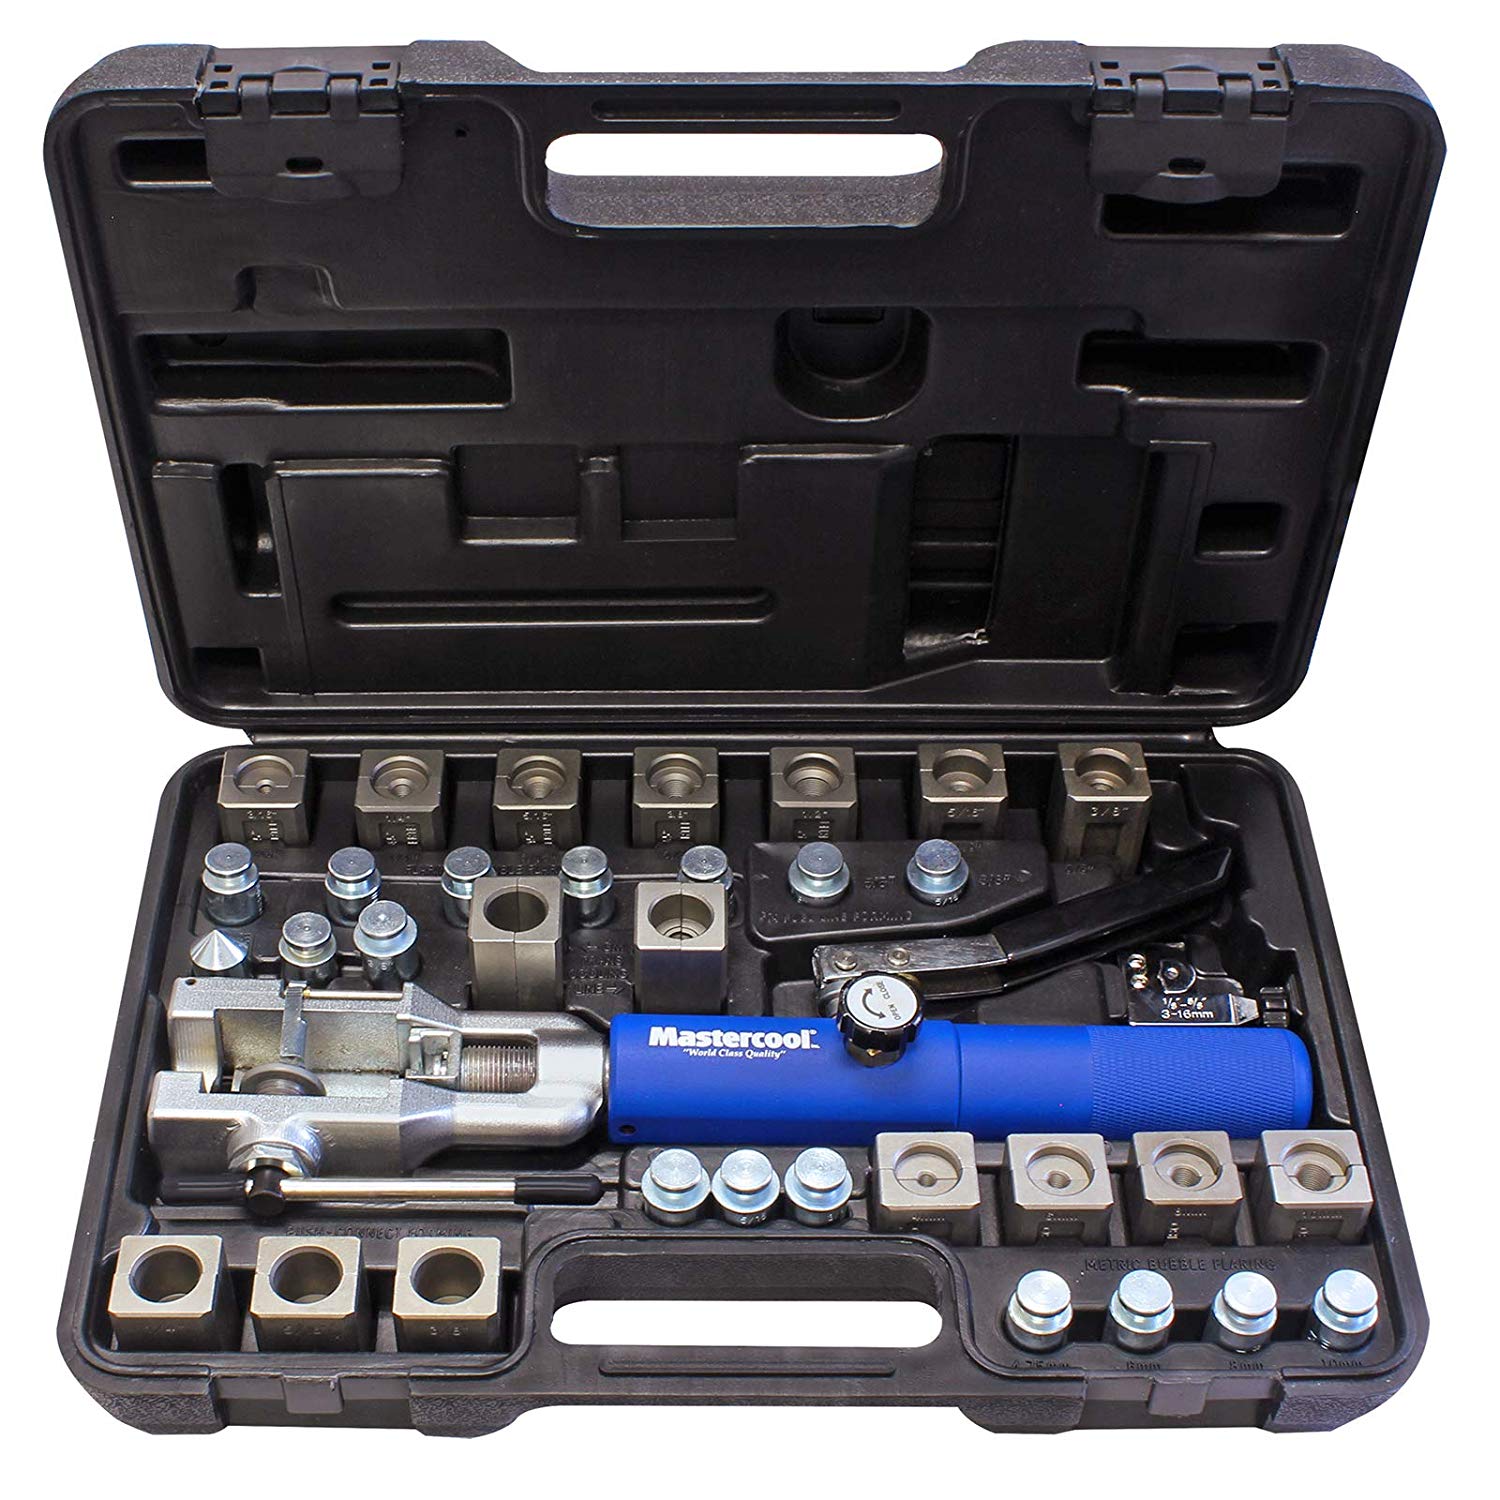 MASTERCOOL 72485-PRC Silver/Blue Universal Hydraulic Flaring Tool (3/8"&1/2" Transmission Cooling Line Die/Adapter Sets Plus Tube Cutter) - MPR Tools & Equipment